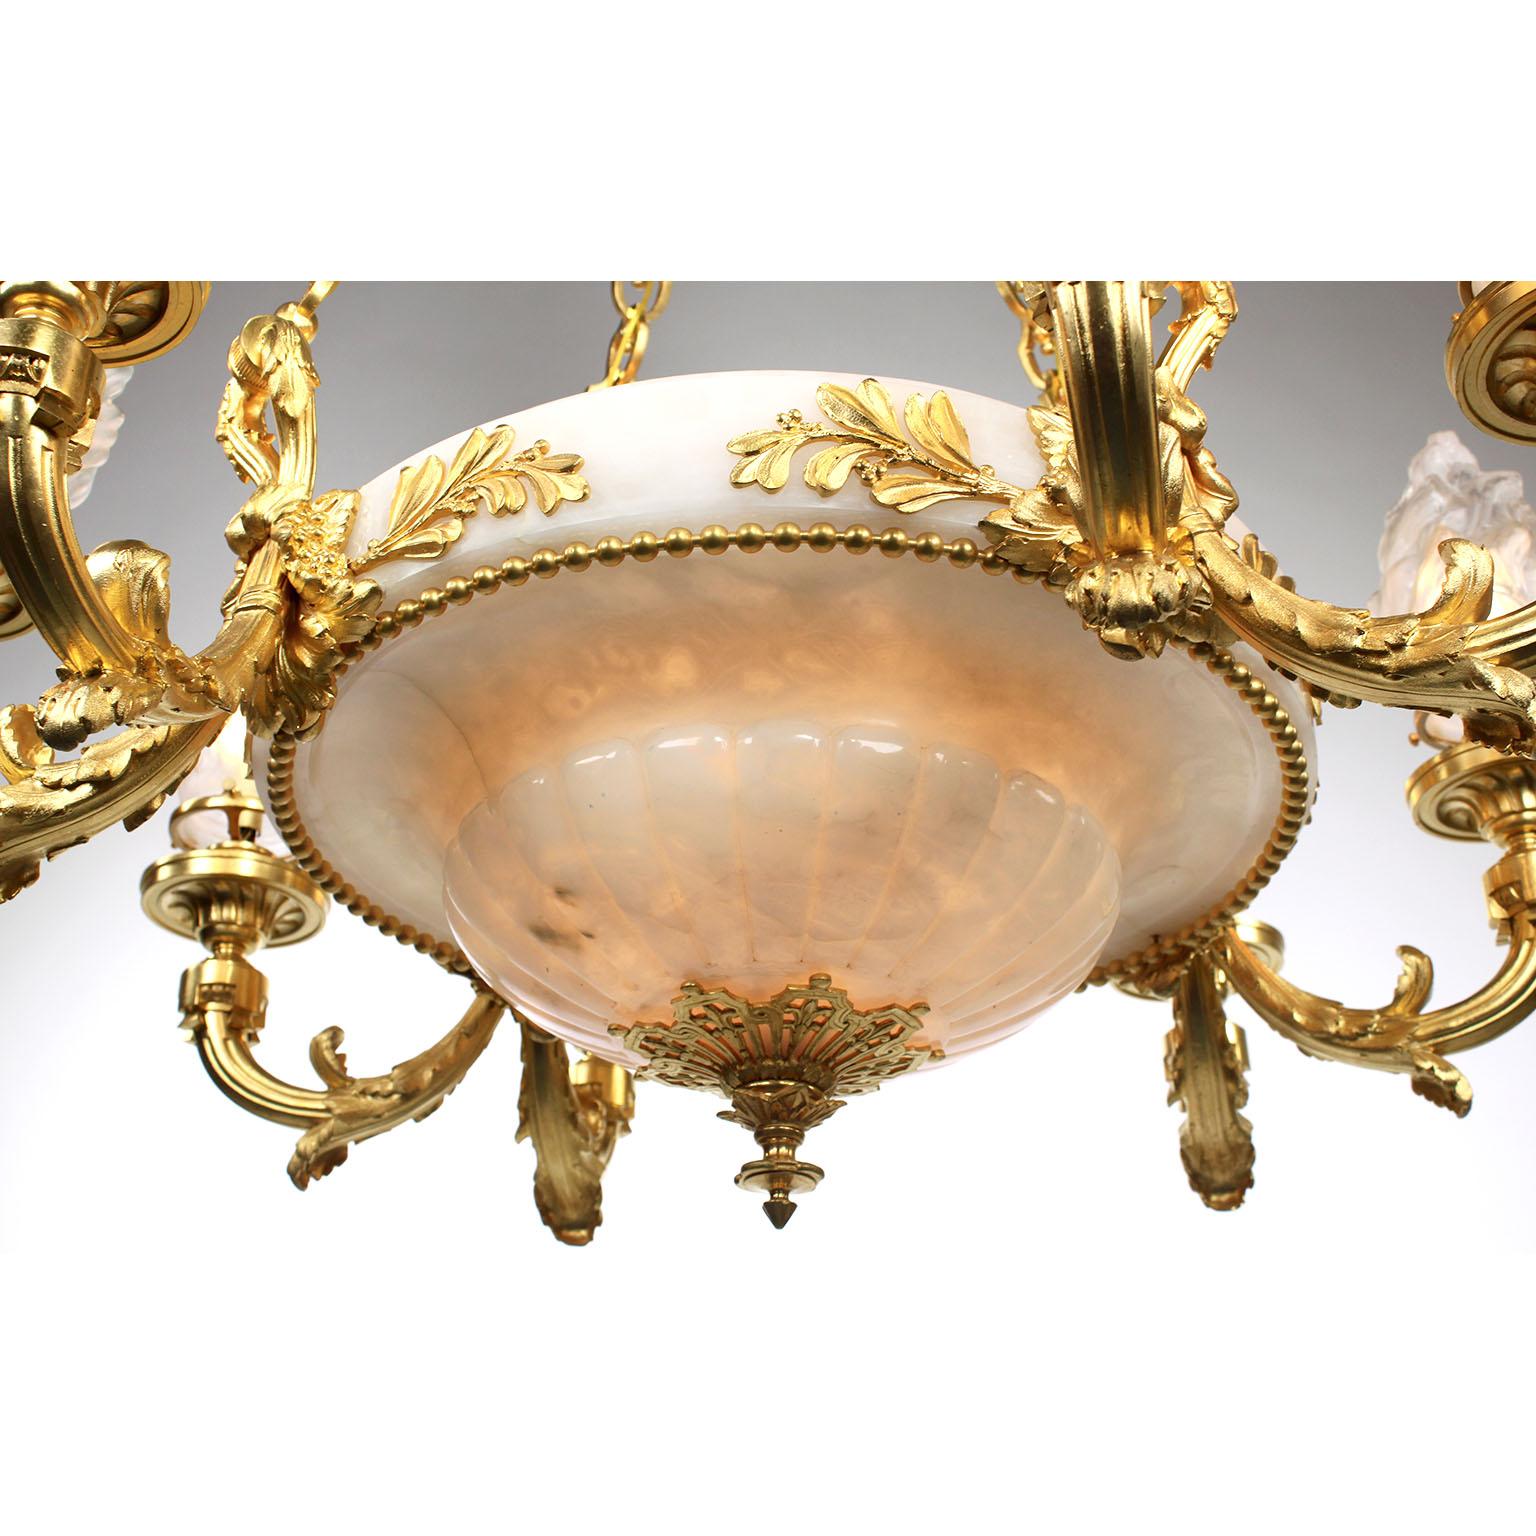 Neoclassical Revival 19th Century Franco-Russian Neoclassical Style Ormolu & Alabaster Chandelier For Sale